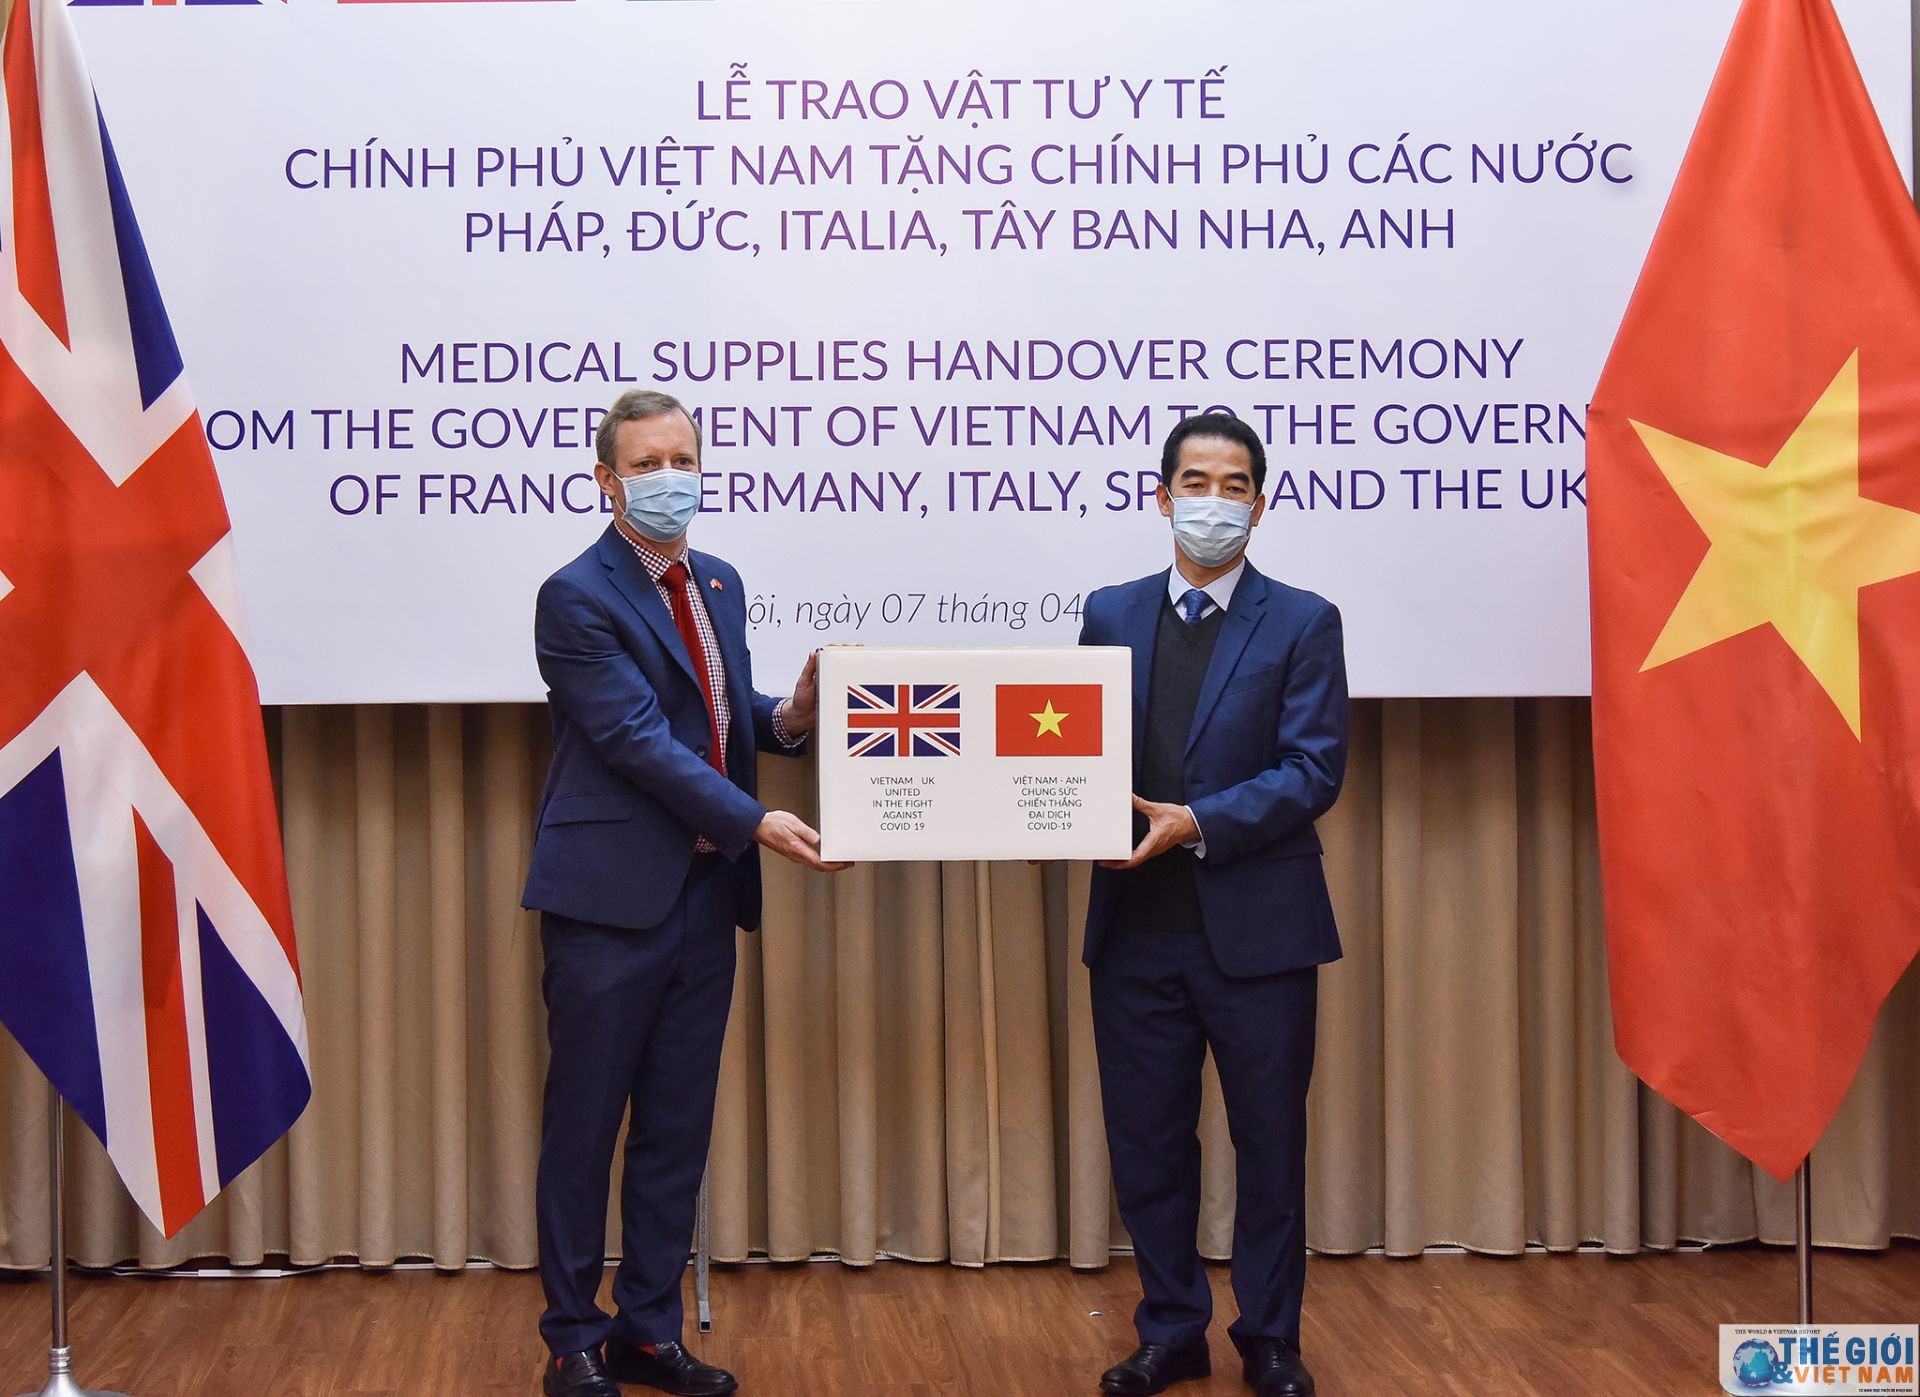 vietnam presents antibacterial masks to european countries to help fight the covid 19 pandemic